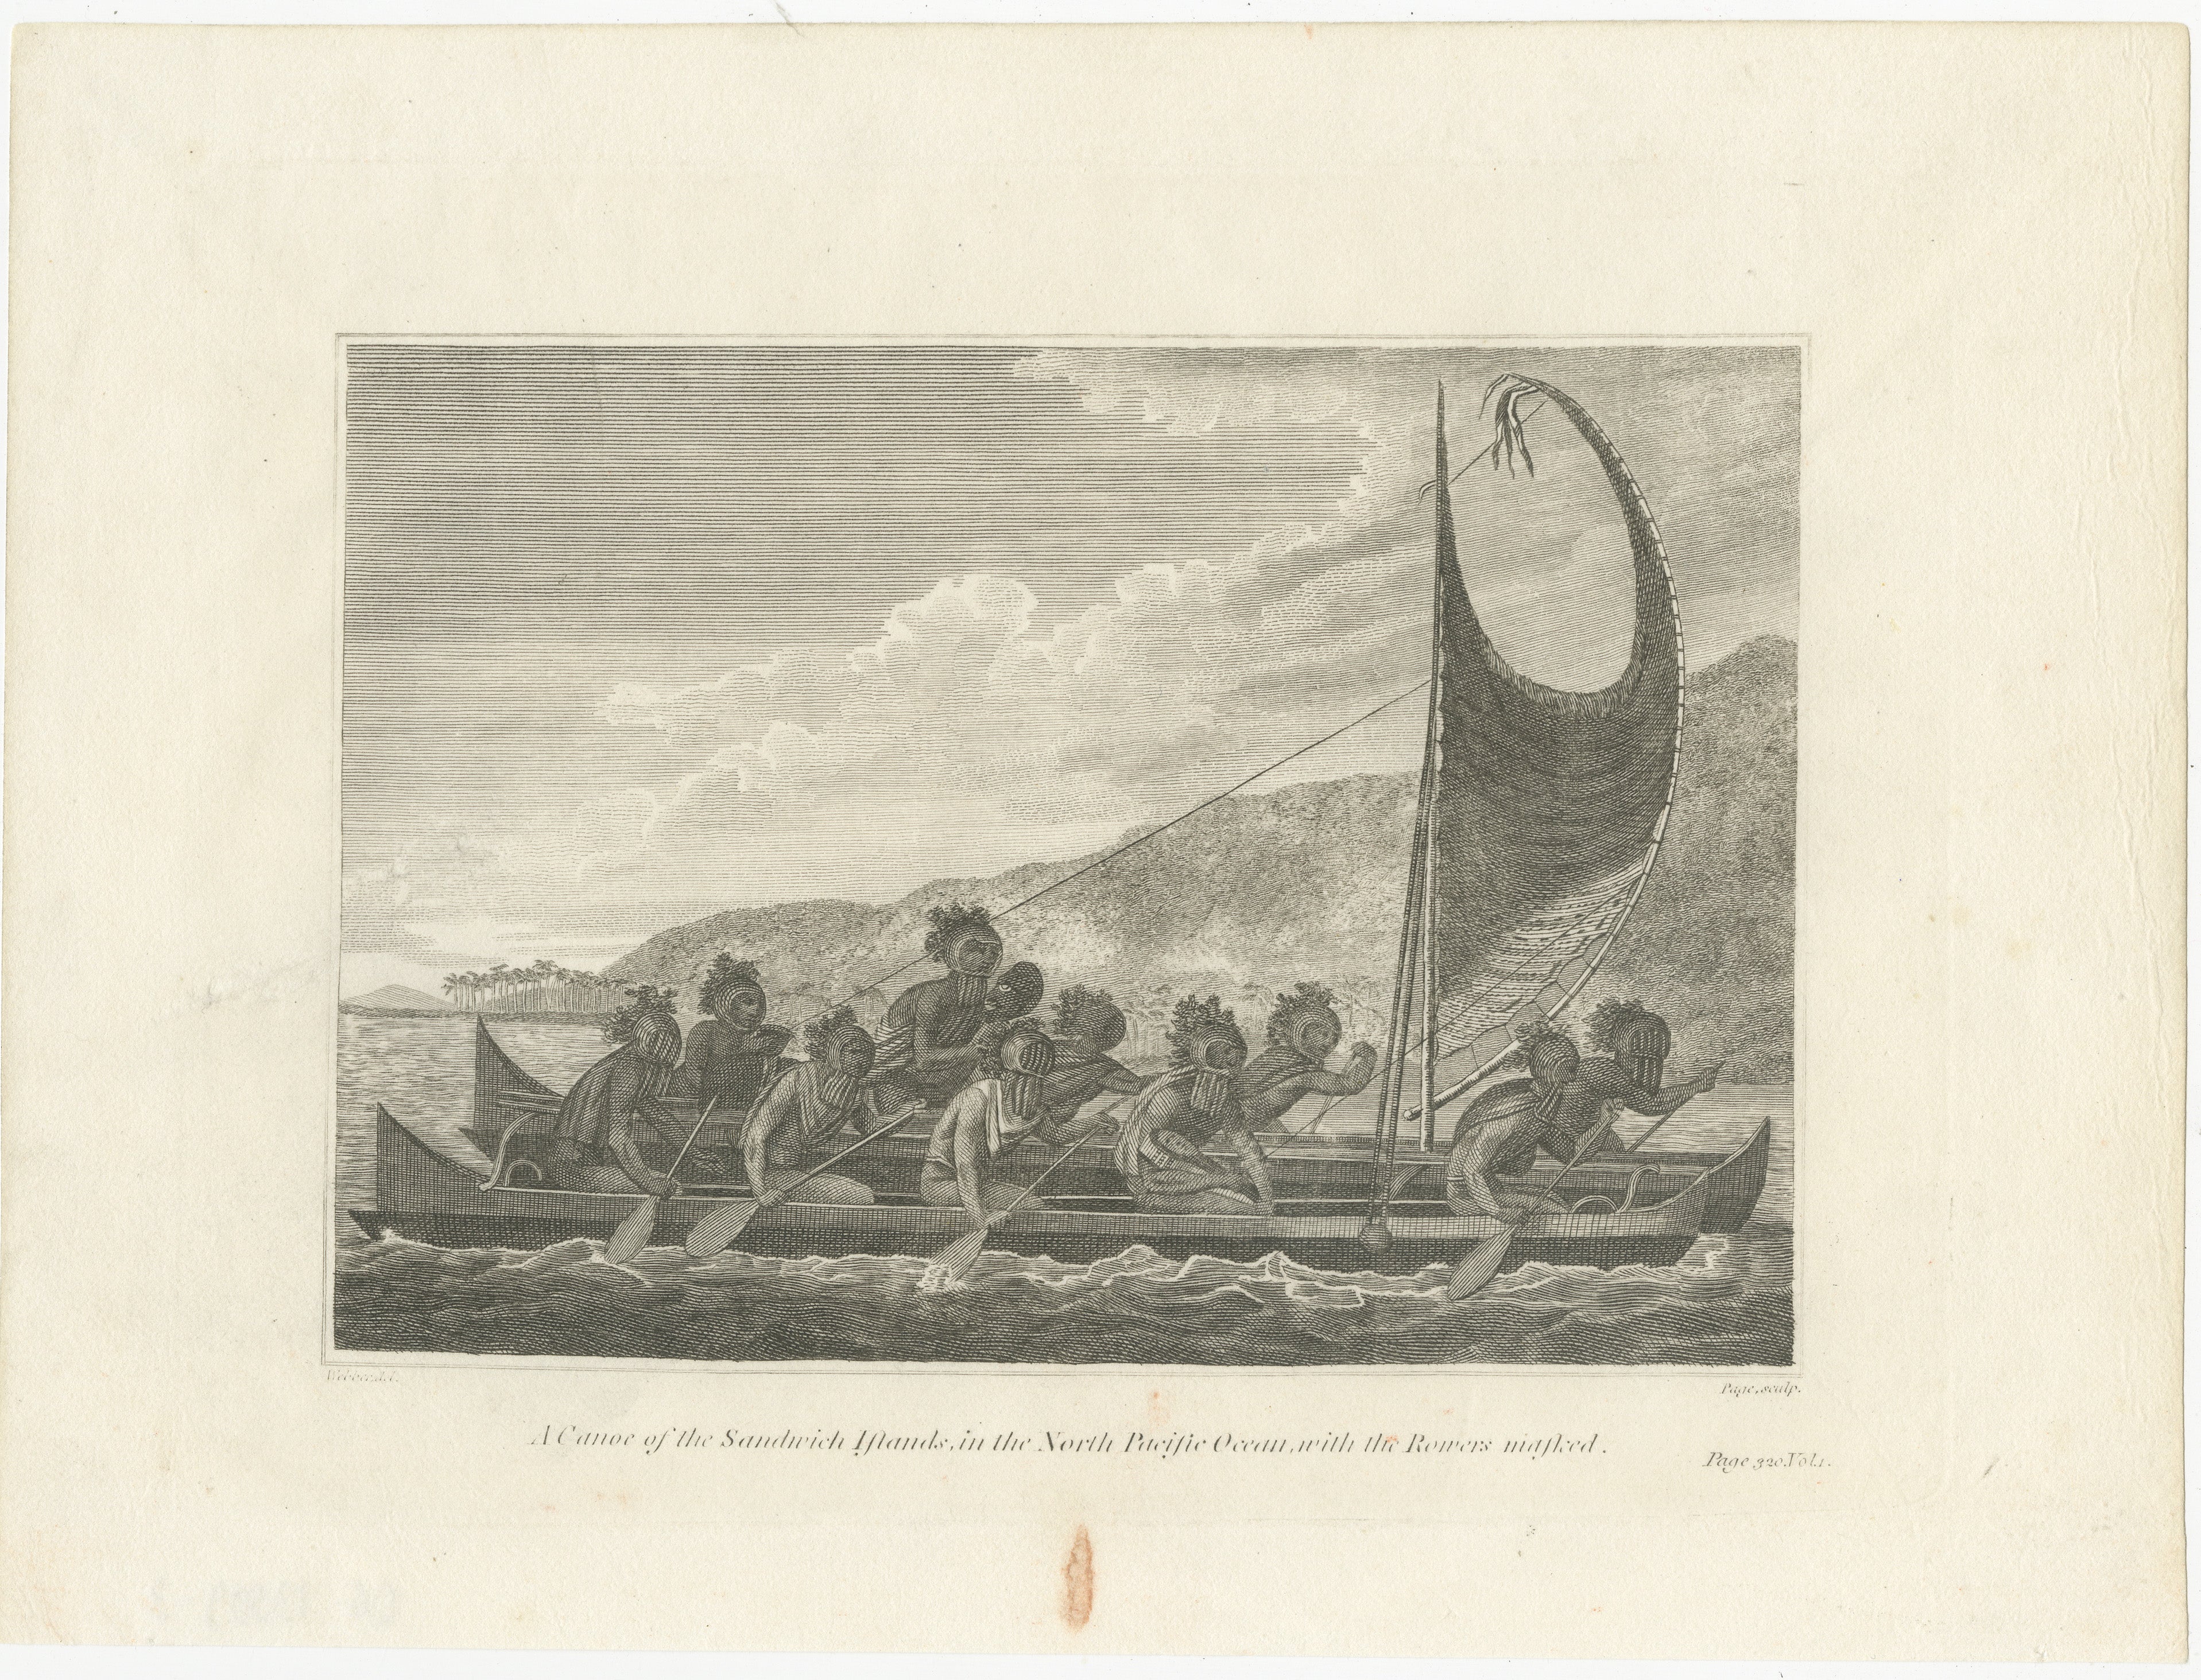 The engraving captures a moment of traditional Hawaiian life, portraying native Hawaiians maneuvering a war canoe. The presence of traditional masks emphasizes the cultural significance of the scene. This engraving, based on the original artwork by